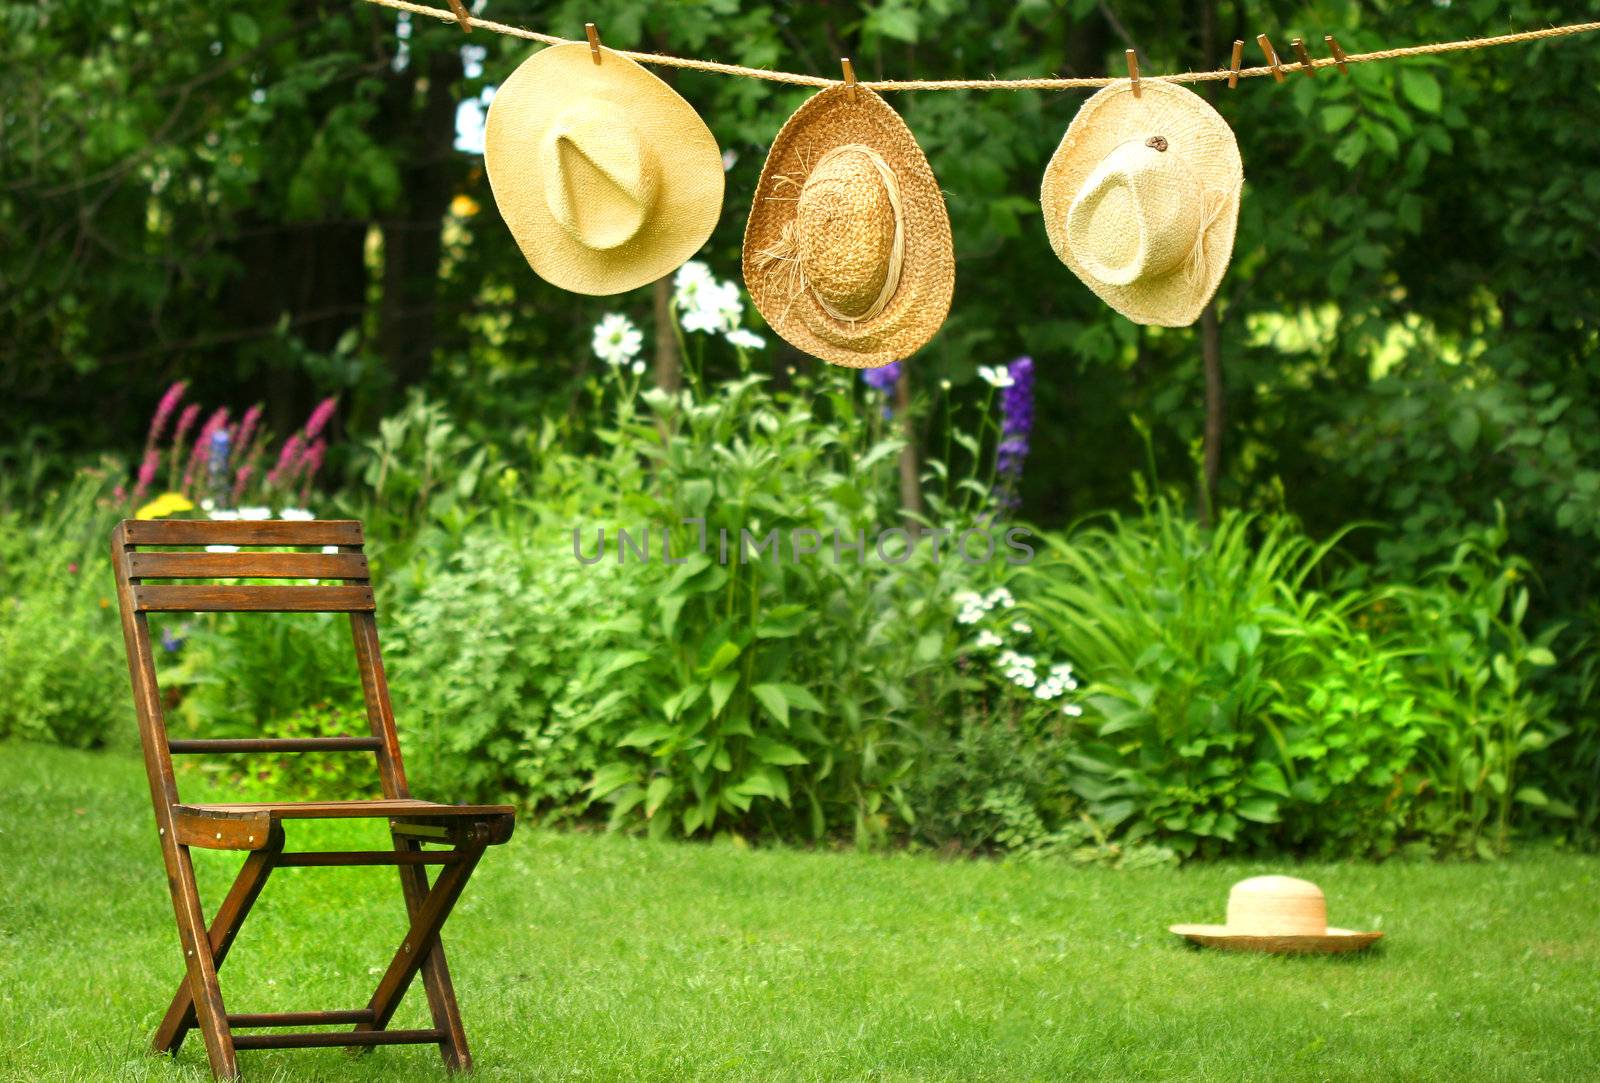 Straw hats on an old clothesline in a summer garden